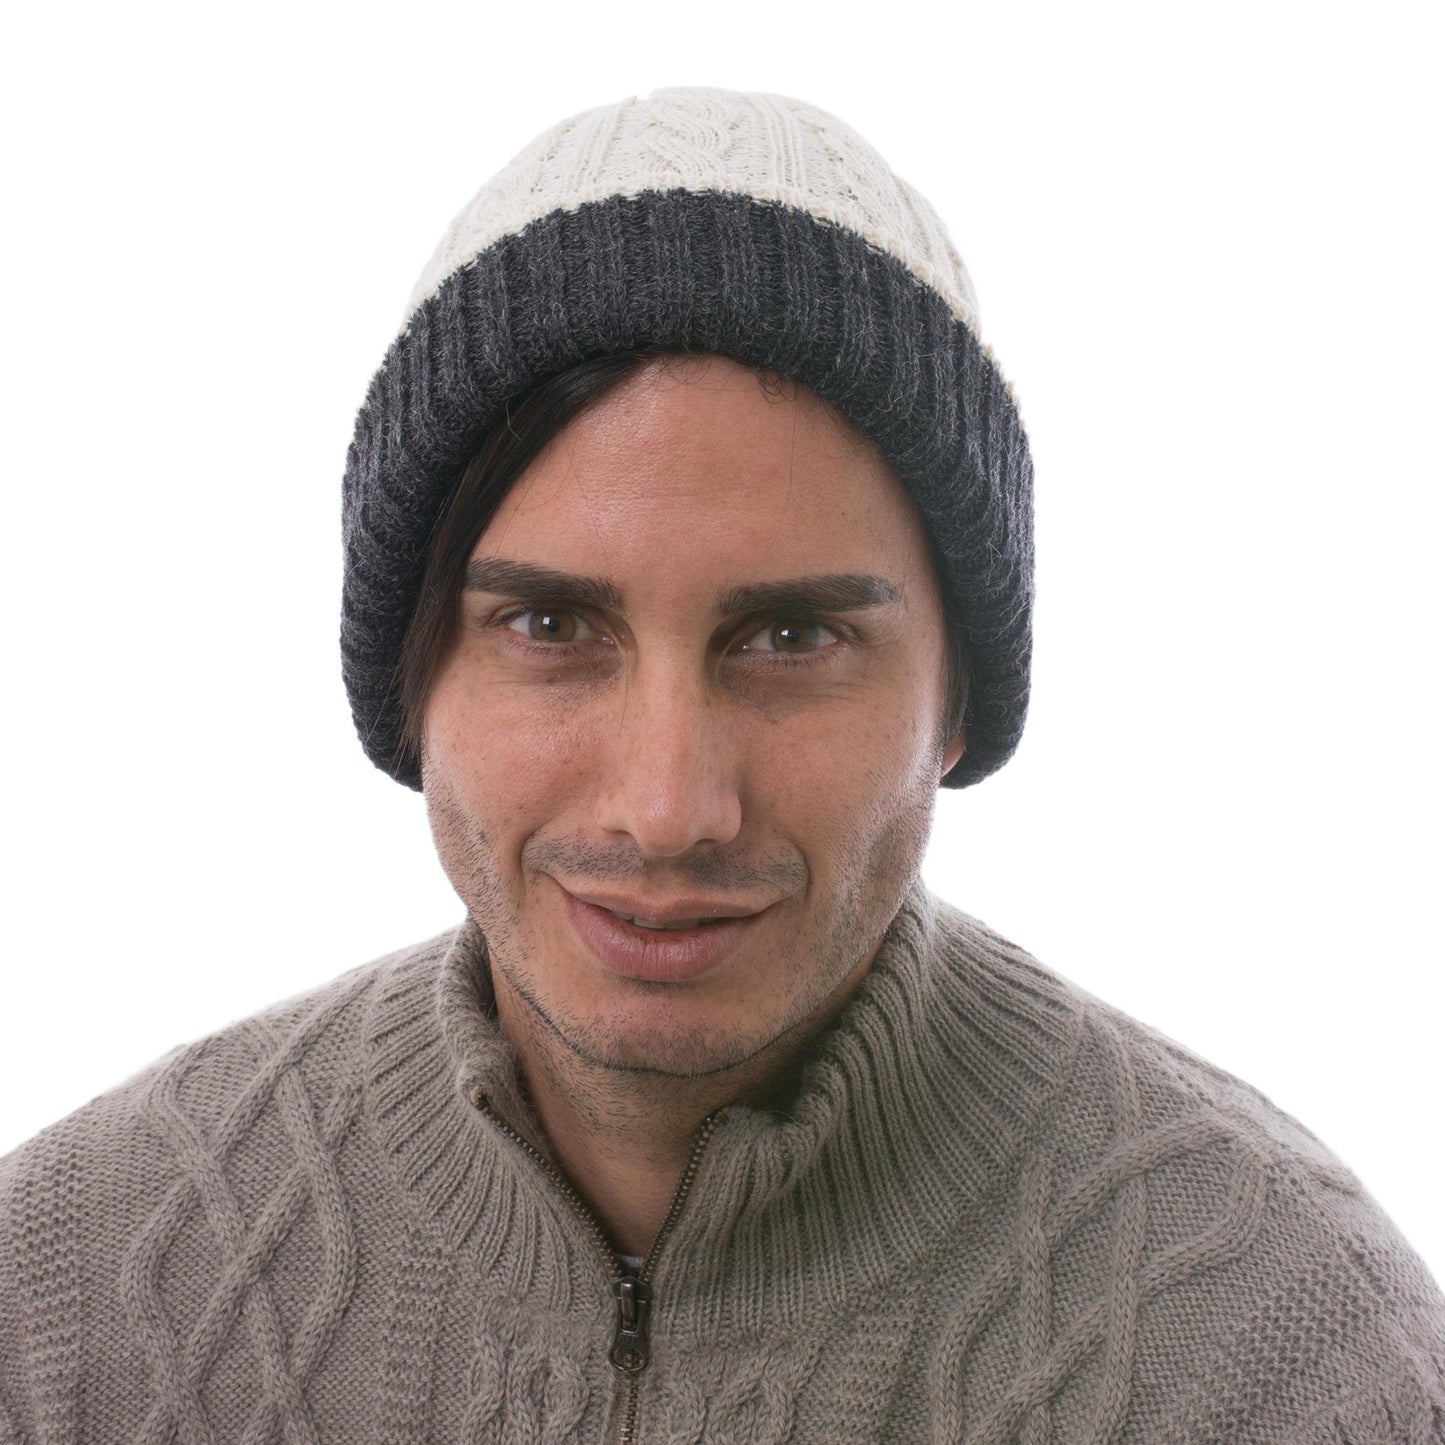 Warm and Contented 100% Alpaca White and Grey Reversible Knit Hat from Peru